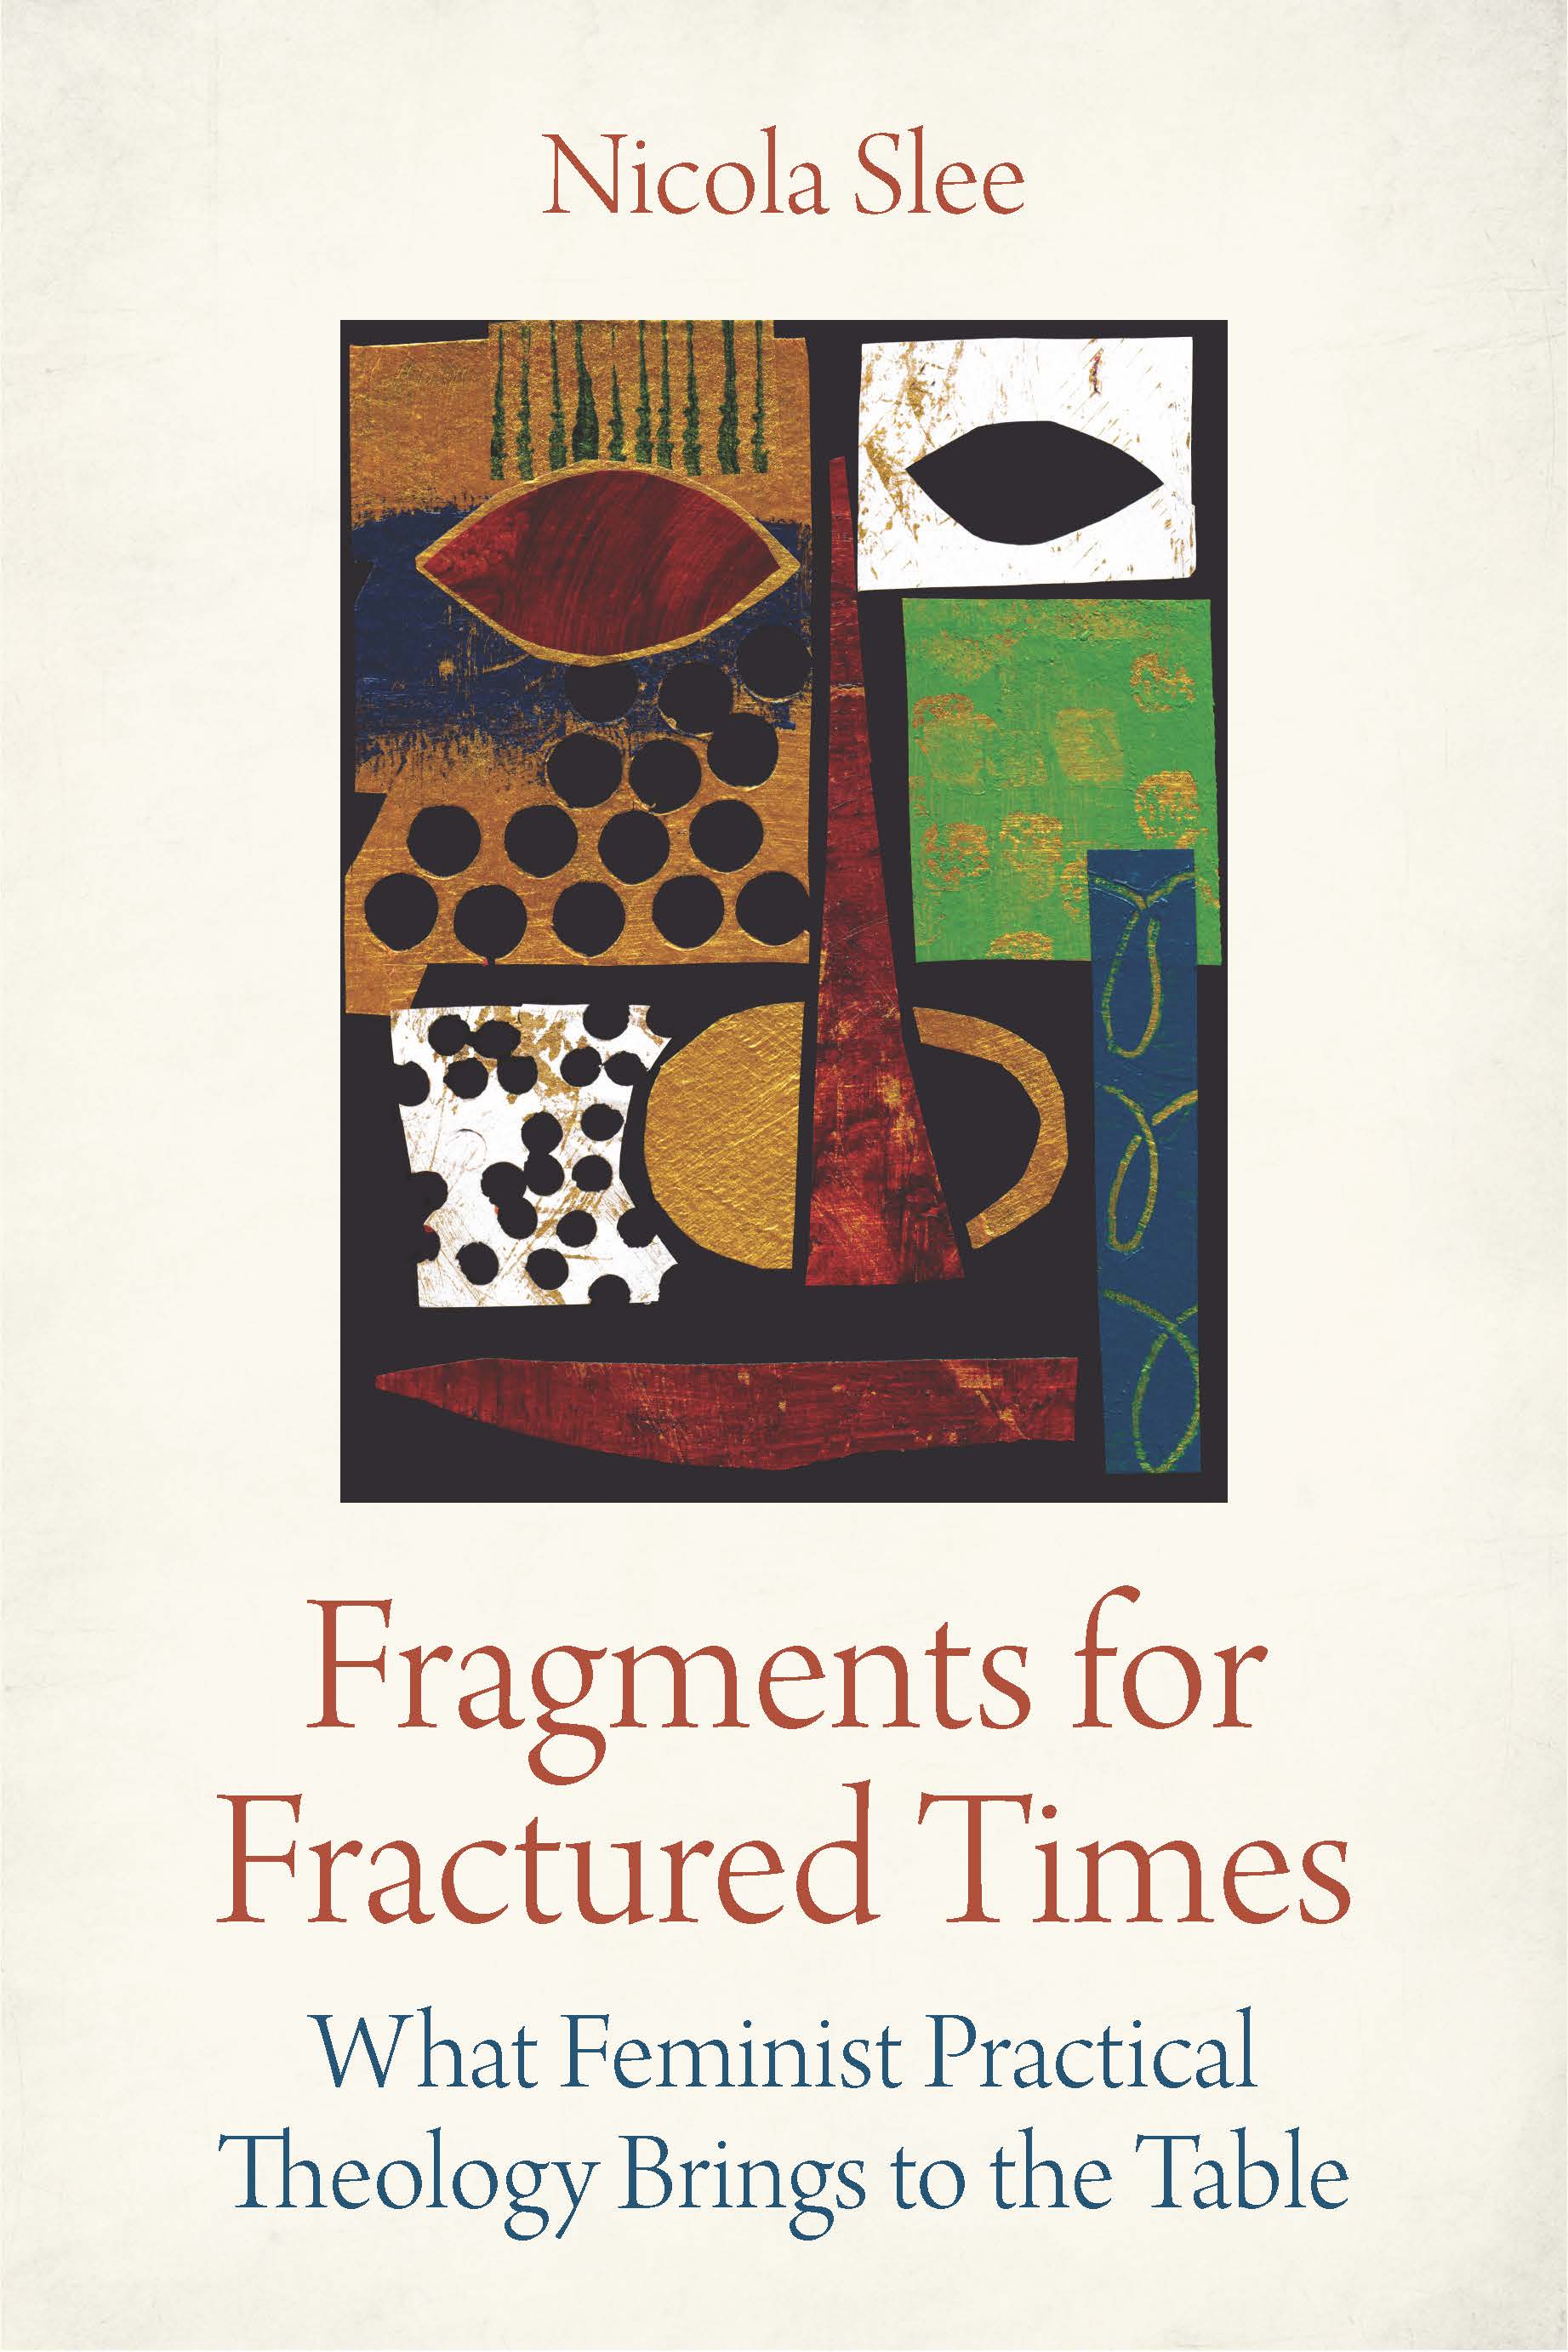 Fragments for Fractured Times